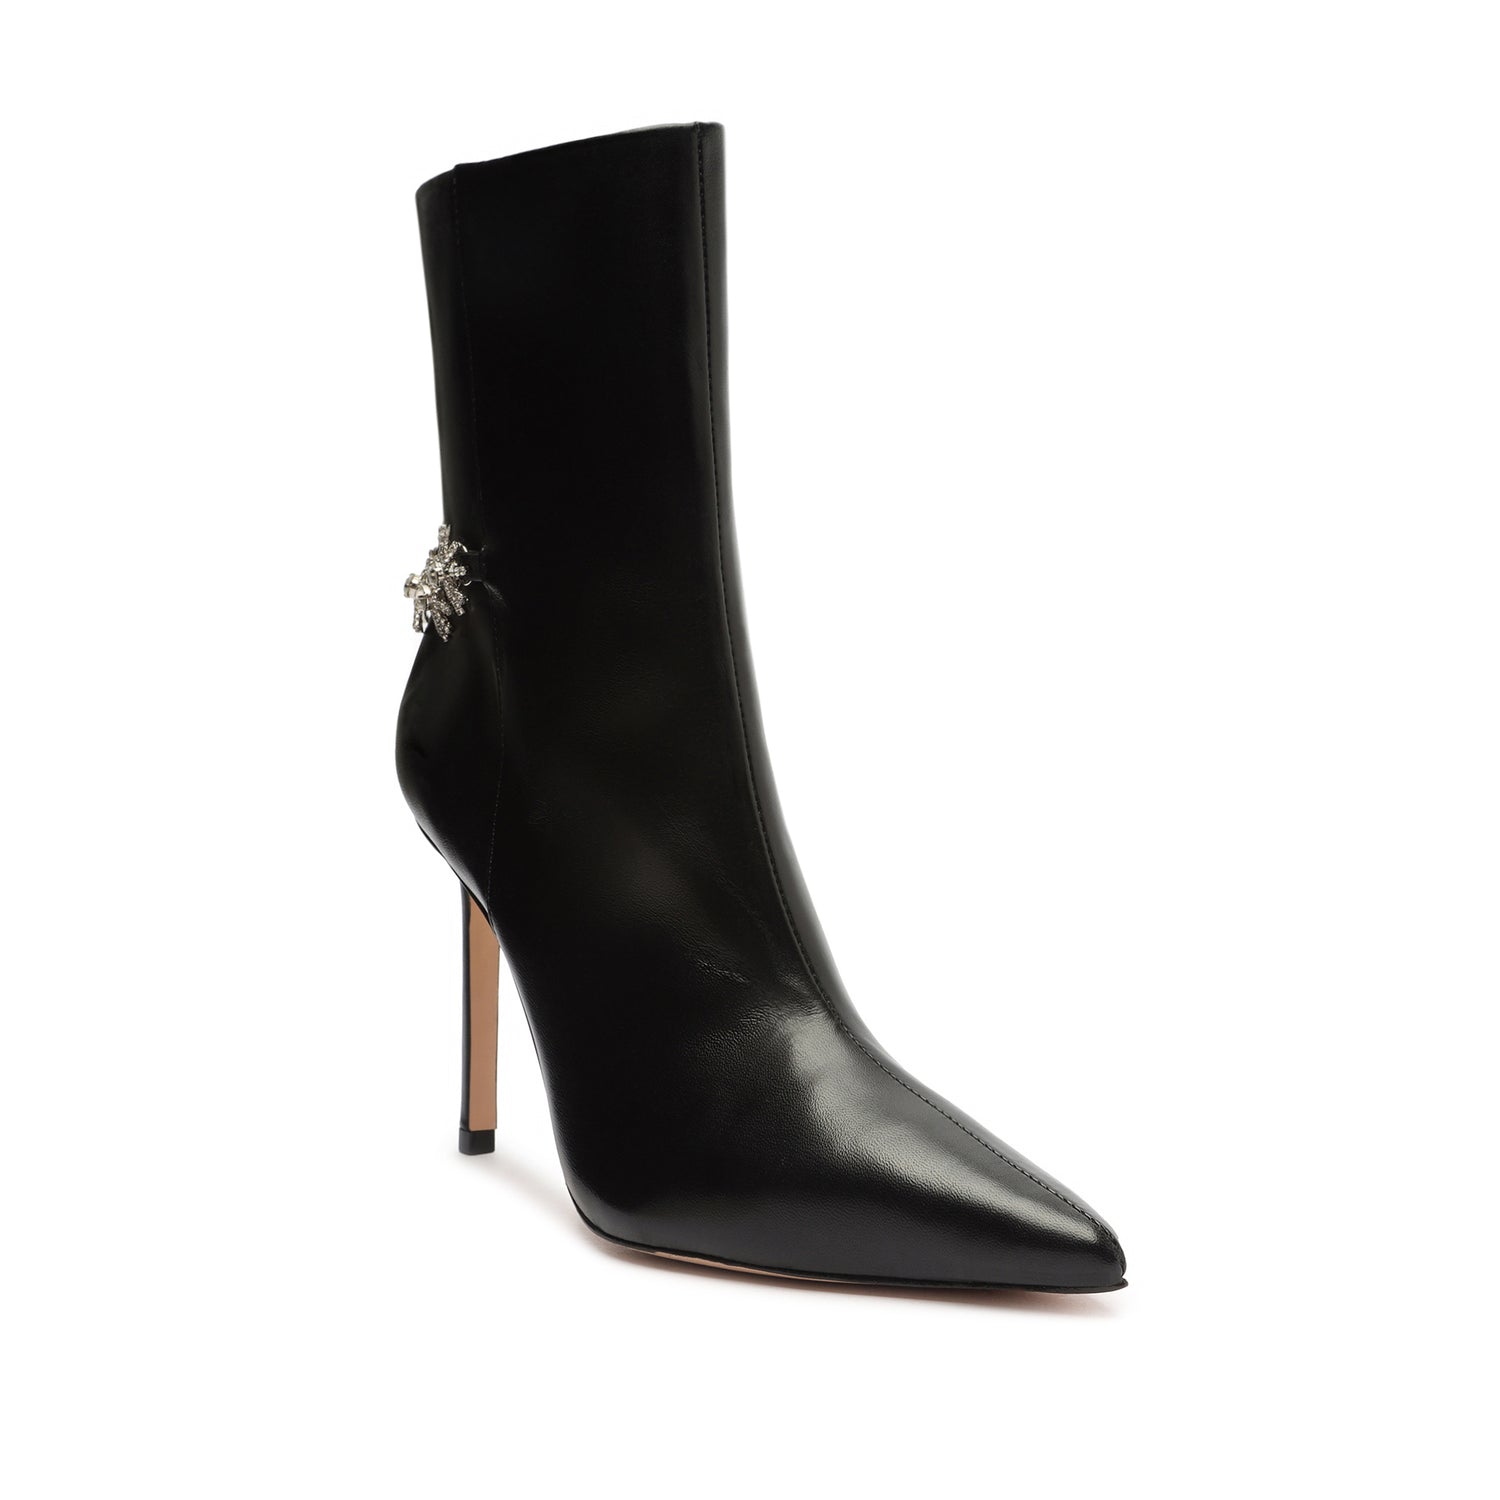 Clementine Nappa Leather Bootie Booties Open Stock    - Schutz Shoes